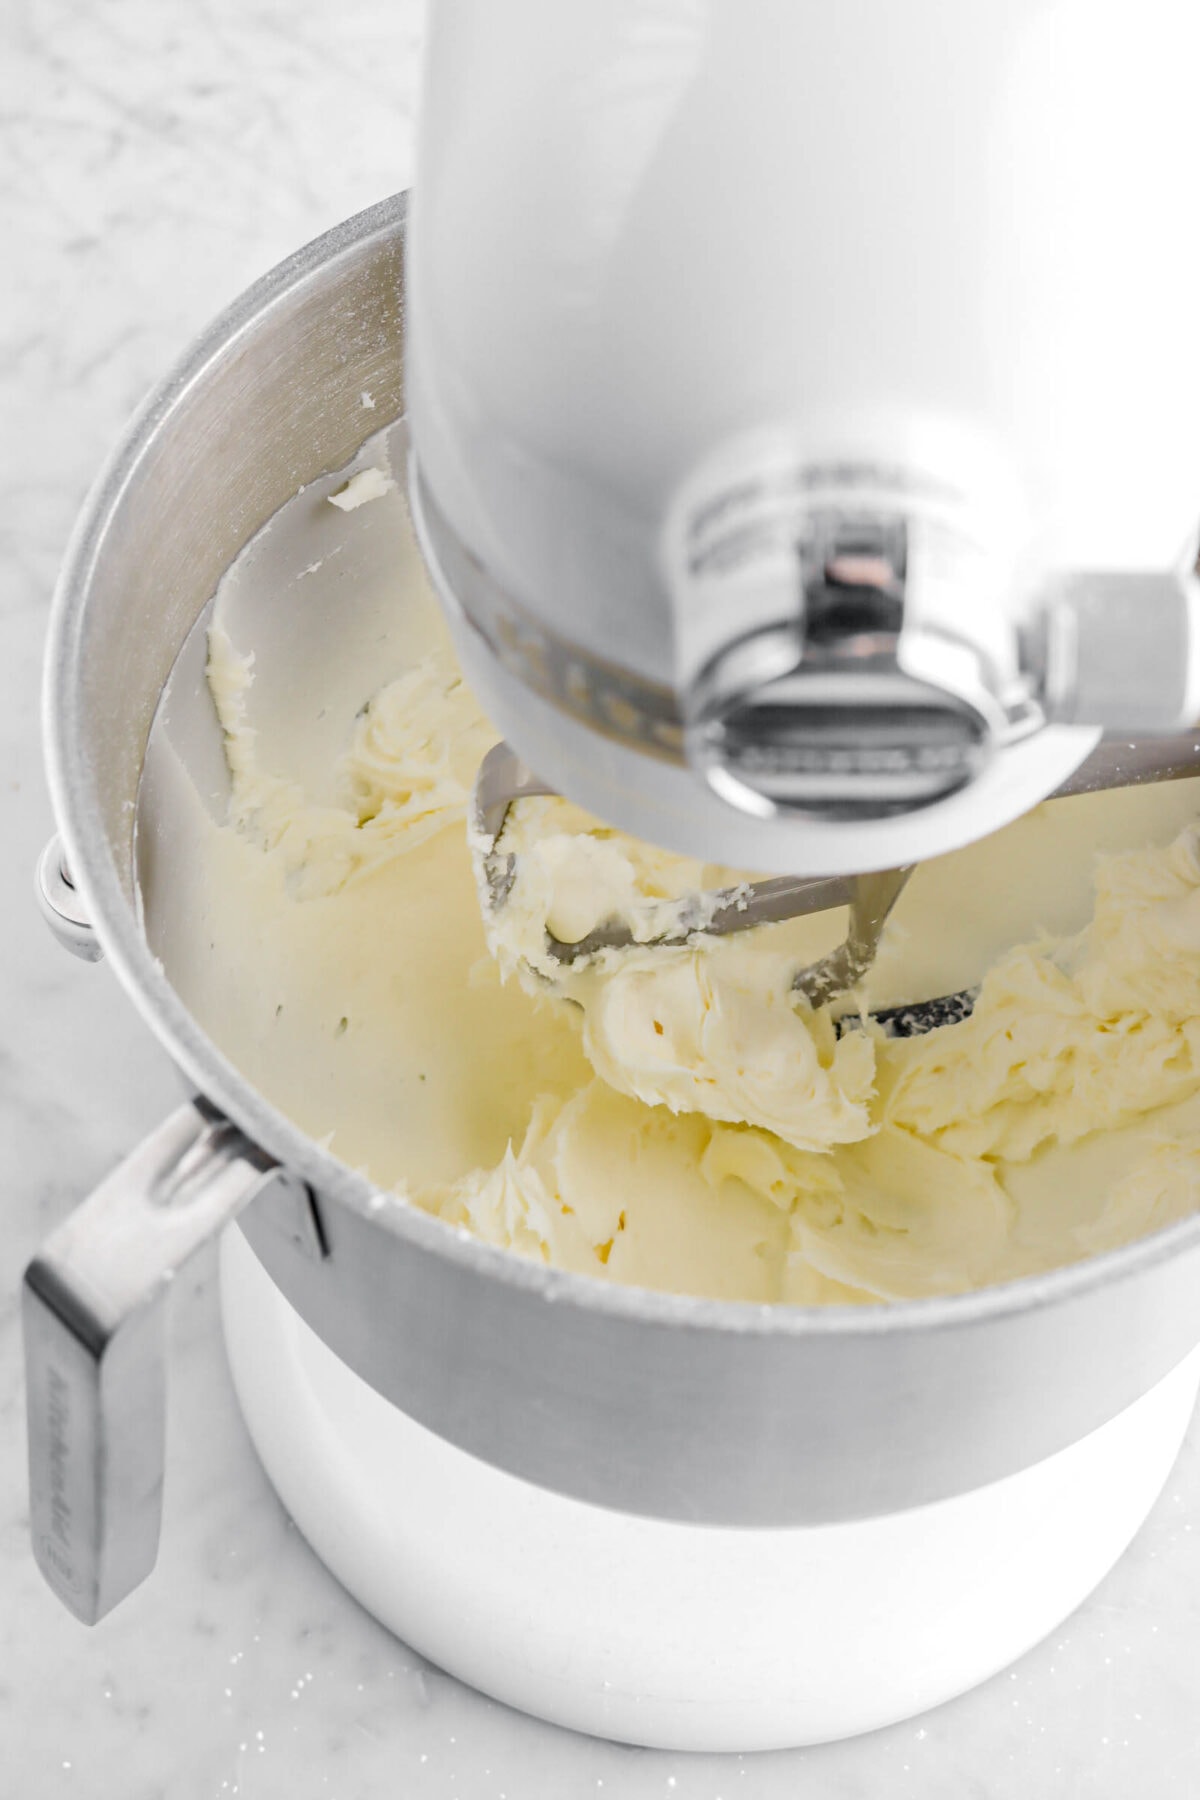 butter and powdered sugar mixed until creamy and smooth in stand mixer.